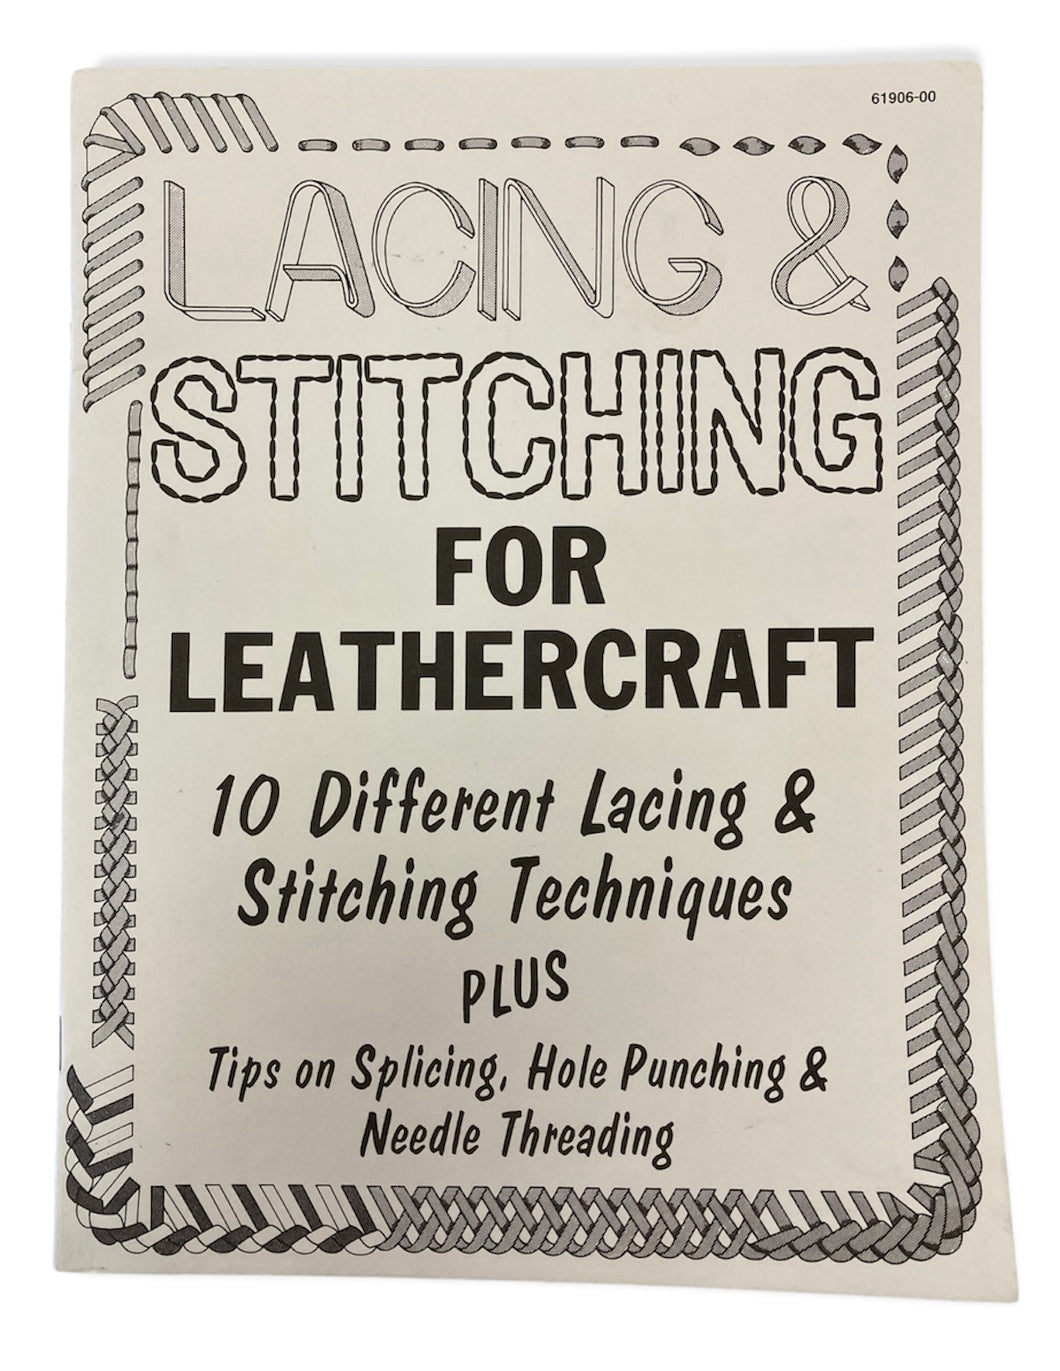 Lacing & Stitching for Leathercraft